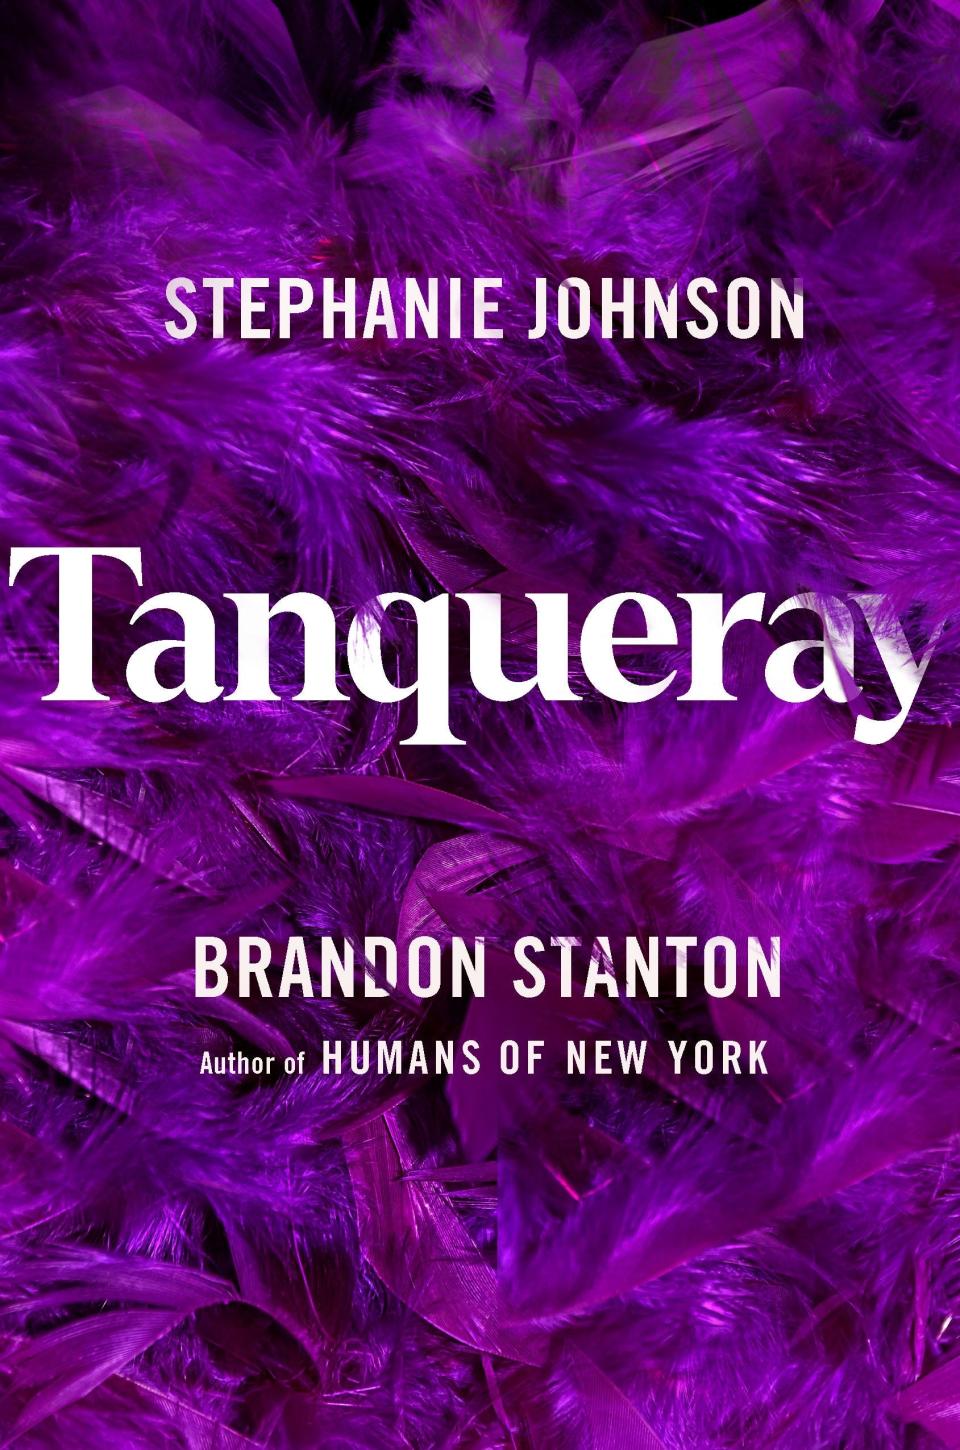 "Tanqueray," by Brandon Stanton and Stephanie Johnson